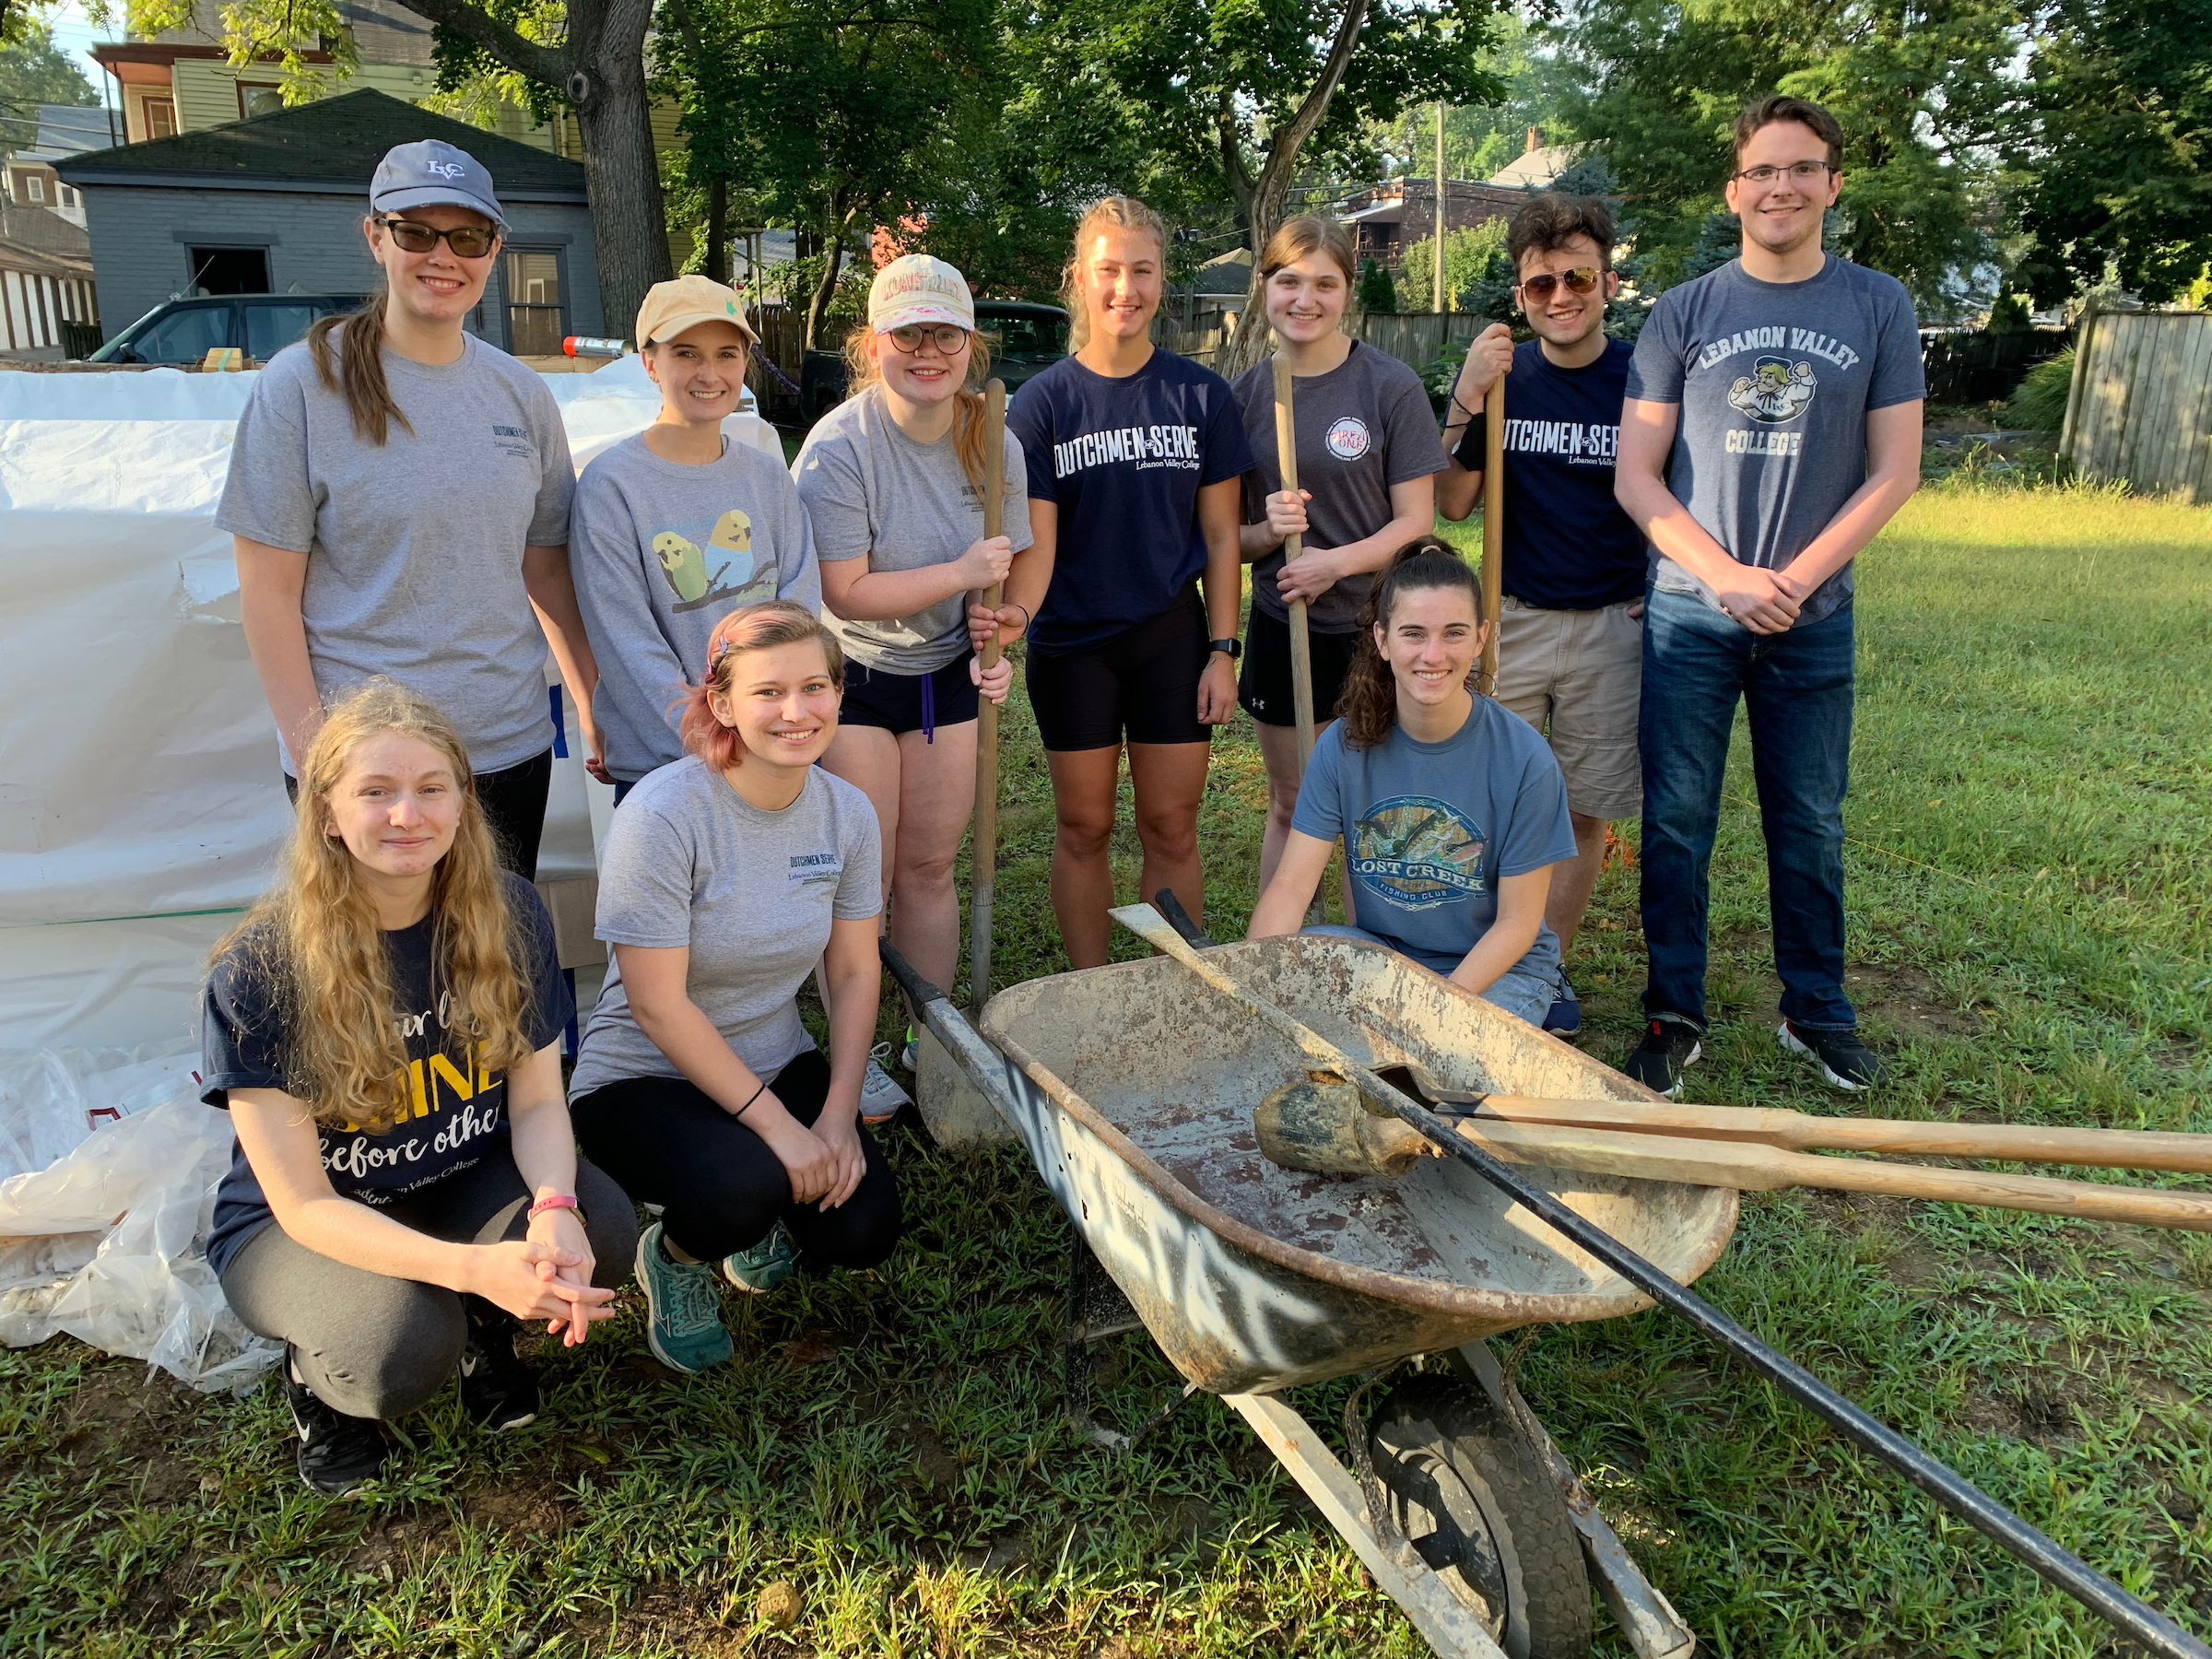 LVC students participate in community service project